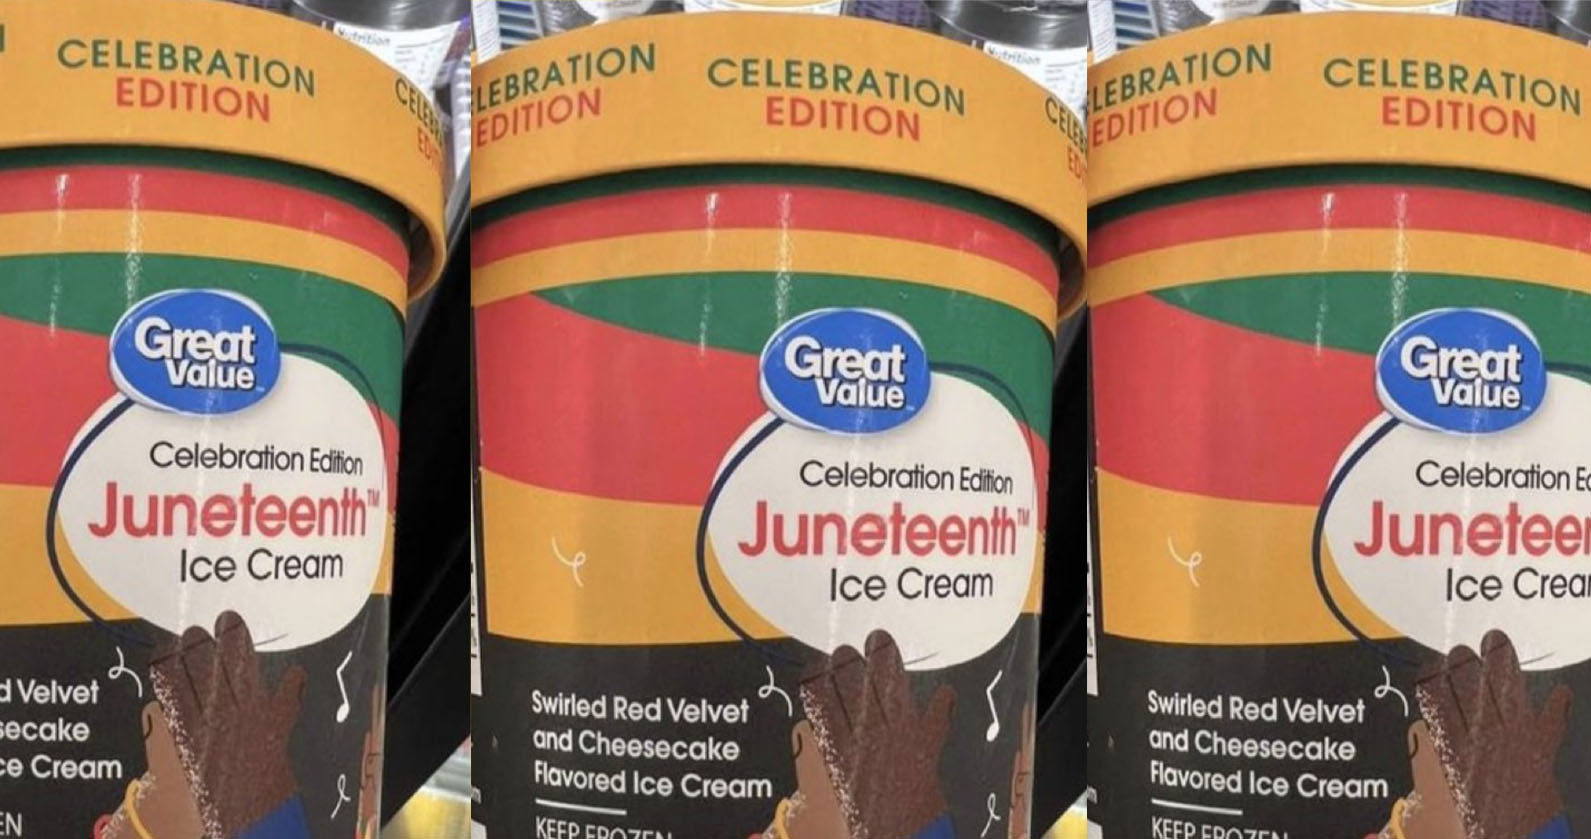 Walmart Pulls Juneteenth-Inspired Ice Cream And Apologizes: ‘We Are Reviewing Our Assortment’